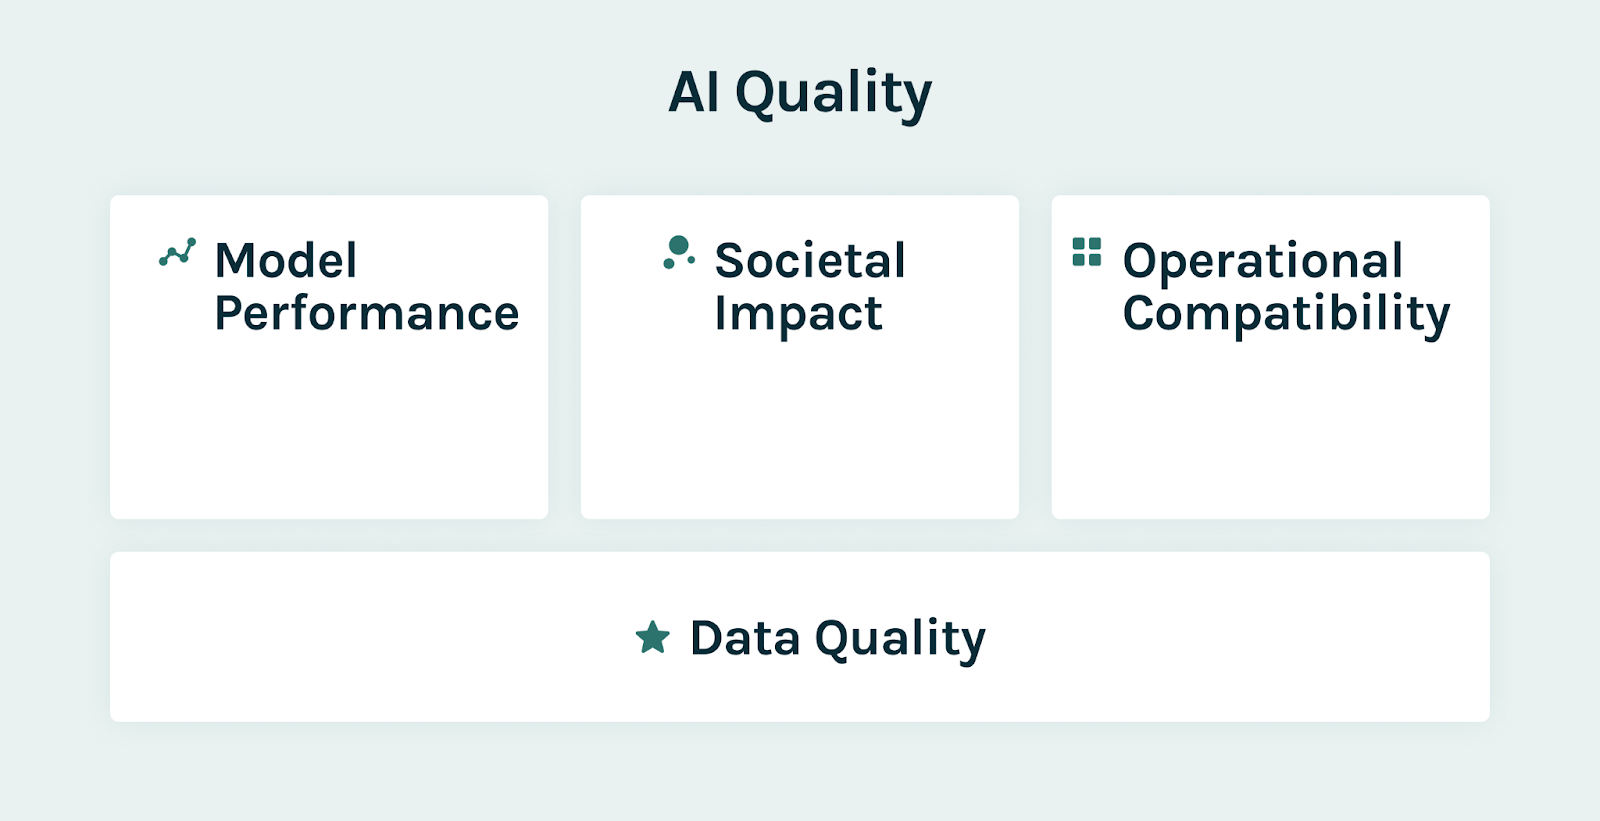 AI Quality Overview illustration, showing the four pillars of model performance, societal impact, operational compatibility, and data quality.